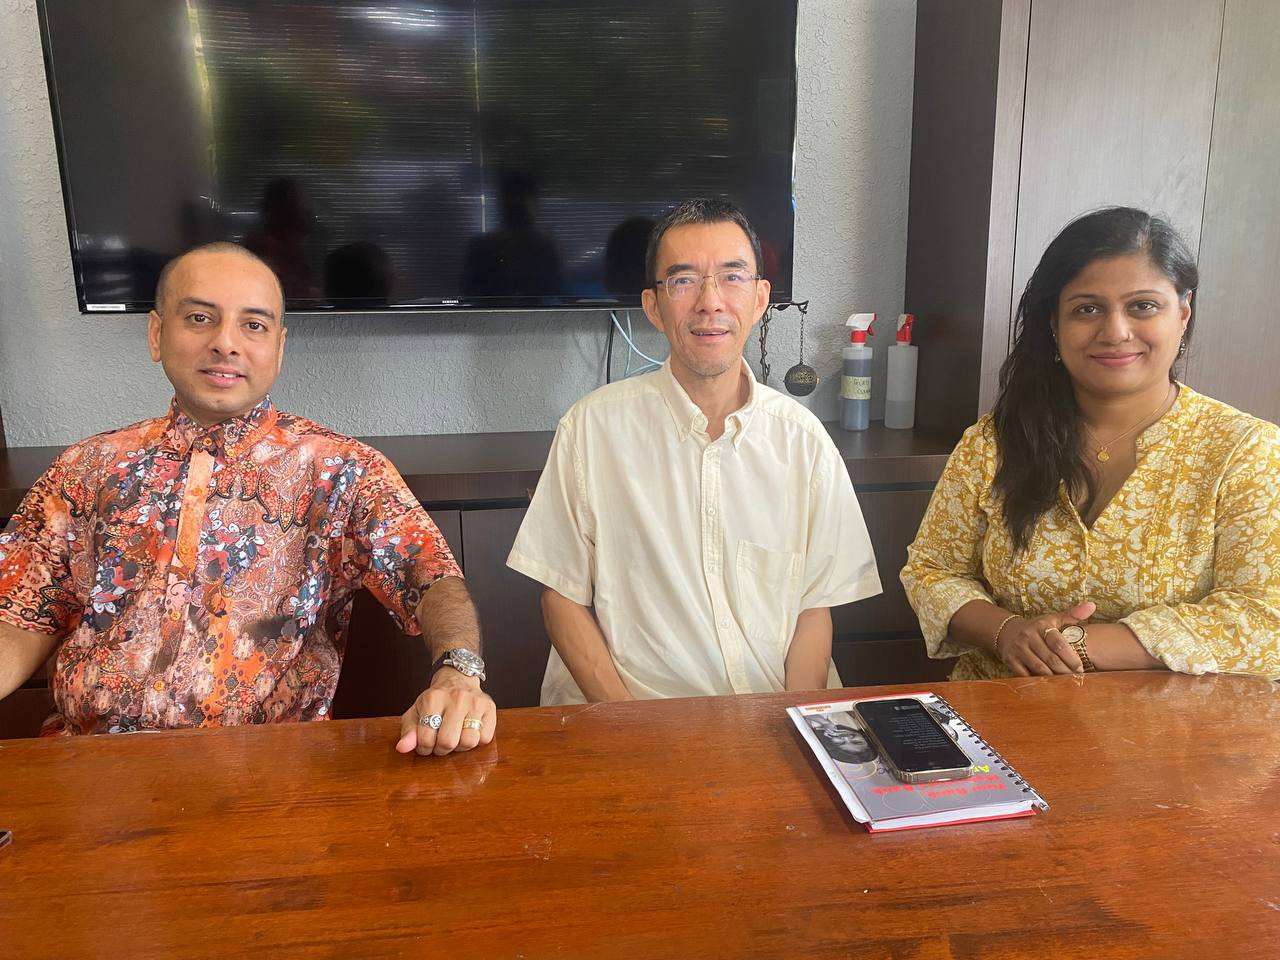 (From left) Bangsar Park Resident Association president Nitesh Malani, Bukit Bandaraya Residents Association president Charles Tan, and Lucky Garden Resident Association president Sarikha Kandasamy express their frustration over frequent water supply disruptions in Bangsar, especially during festive seasons. – Pic courtesy of Lucky Garden Resident Association, January 20, 2023 